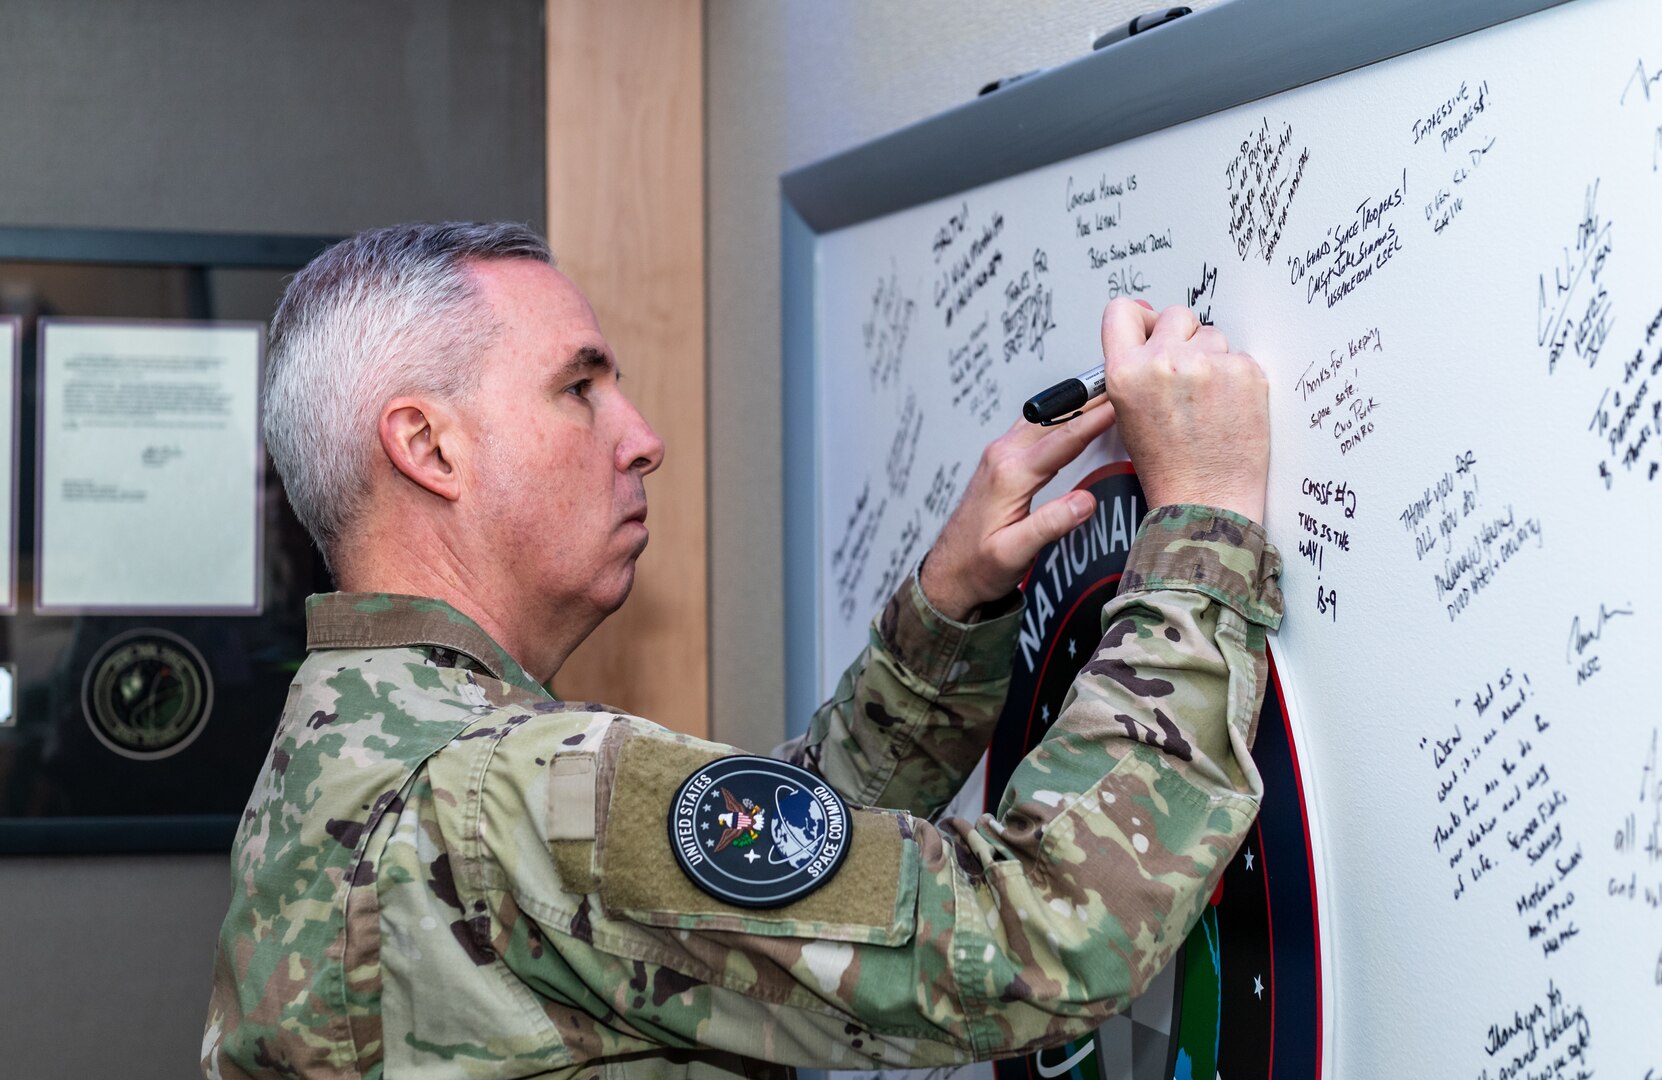 Man in military uniform signing board